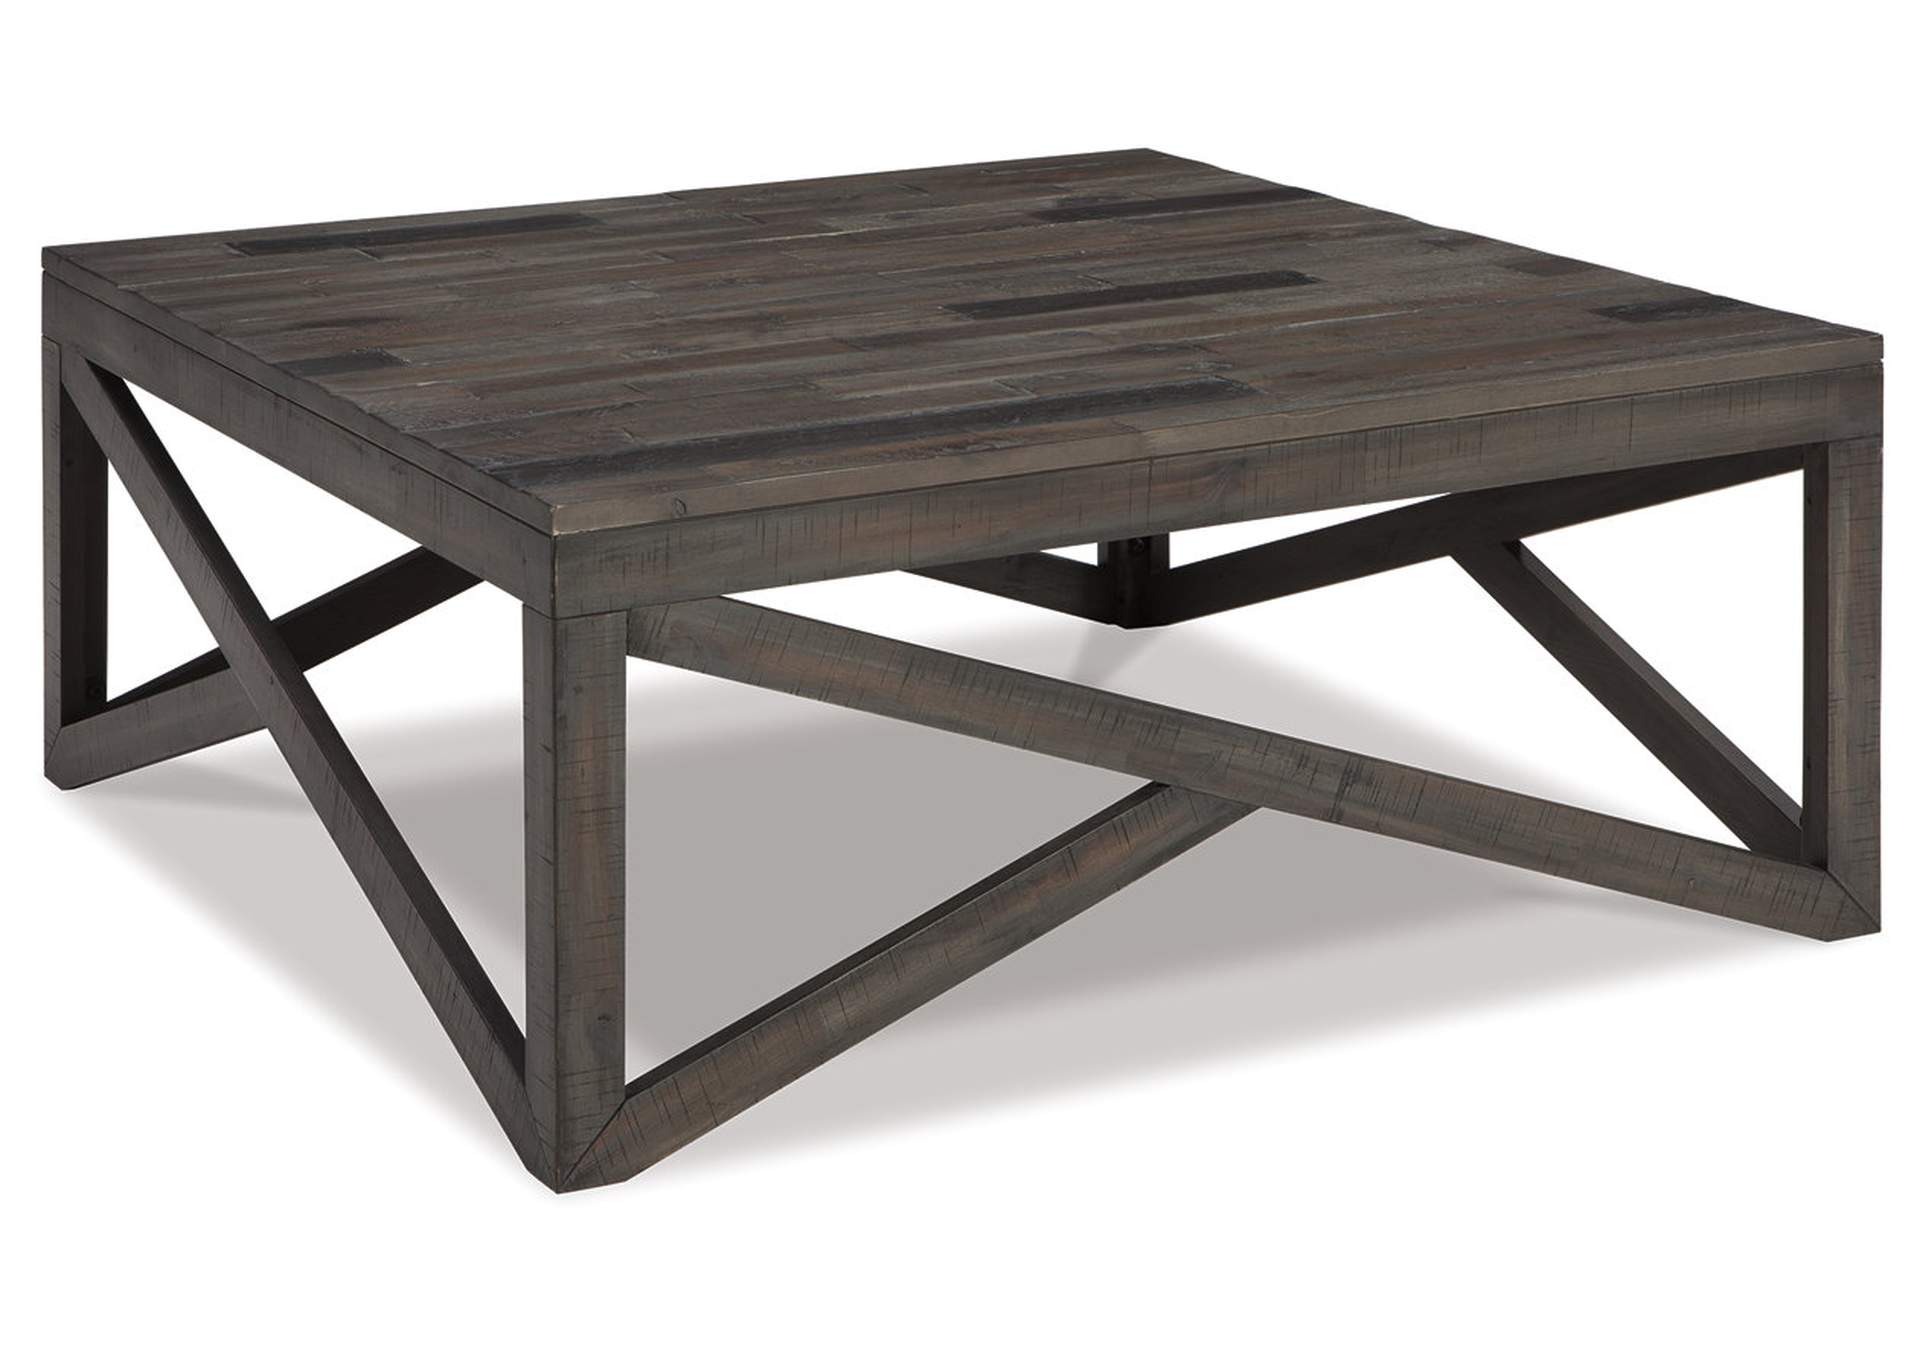 Haroflyn Coffee Table,Signature Design By Ashley